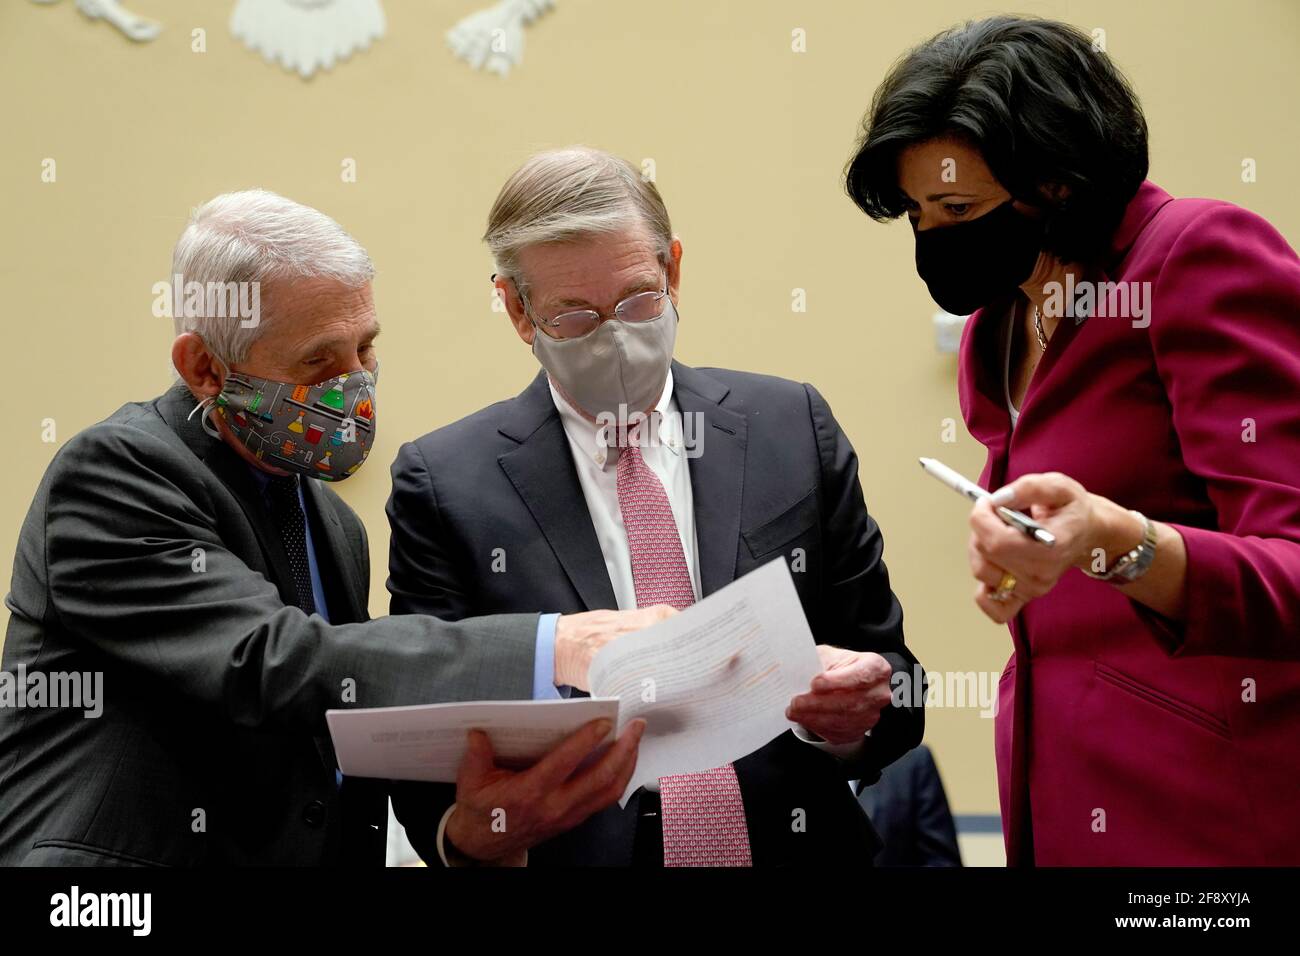 Washington, USA. 15th Apr, 2021. Dr. Anthony Fauci, Dr. David Kessler, and CDC Director Rochelle Walensky before the House Select Subcommittee on the Coronavirus Crisis holds a hearing on the Capitol Hill in Washington, on Thursday, April 15, 2021. (Photo by Amr Alfiky/Pool/Sipa USA) Credit: Sipa USA/Alamy Live News Stock Photo